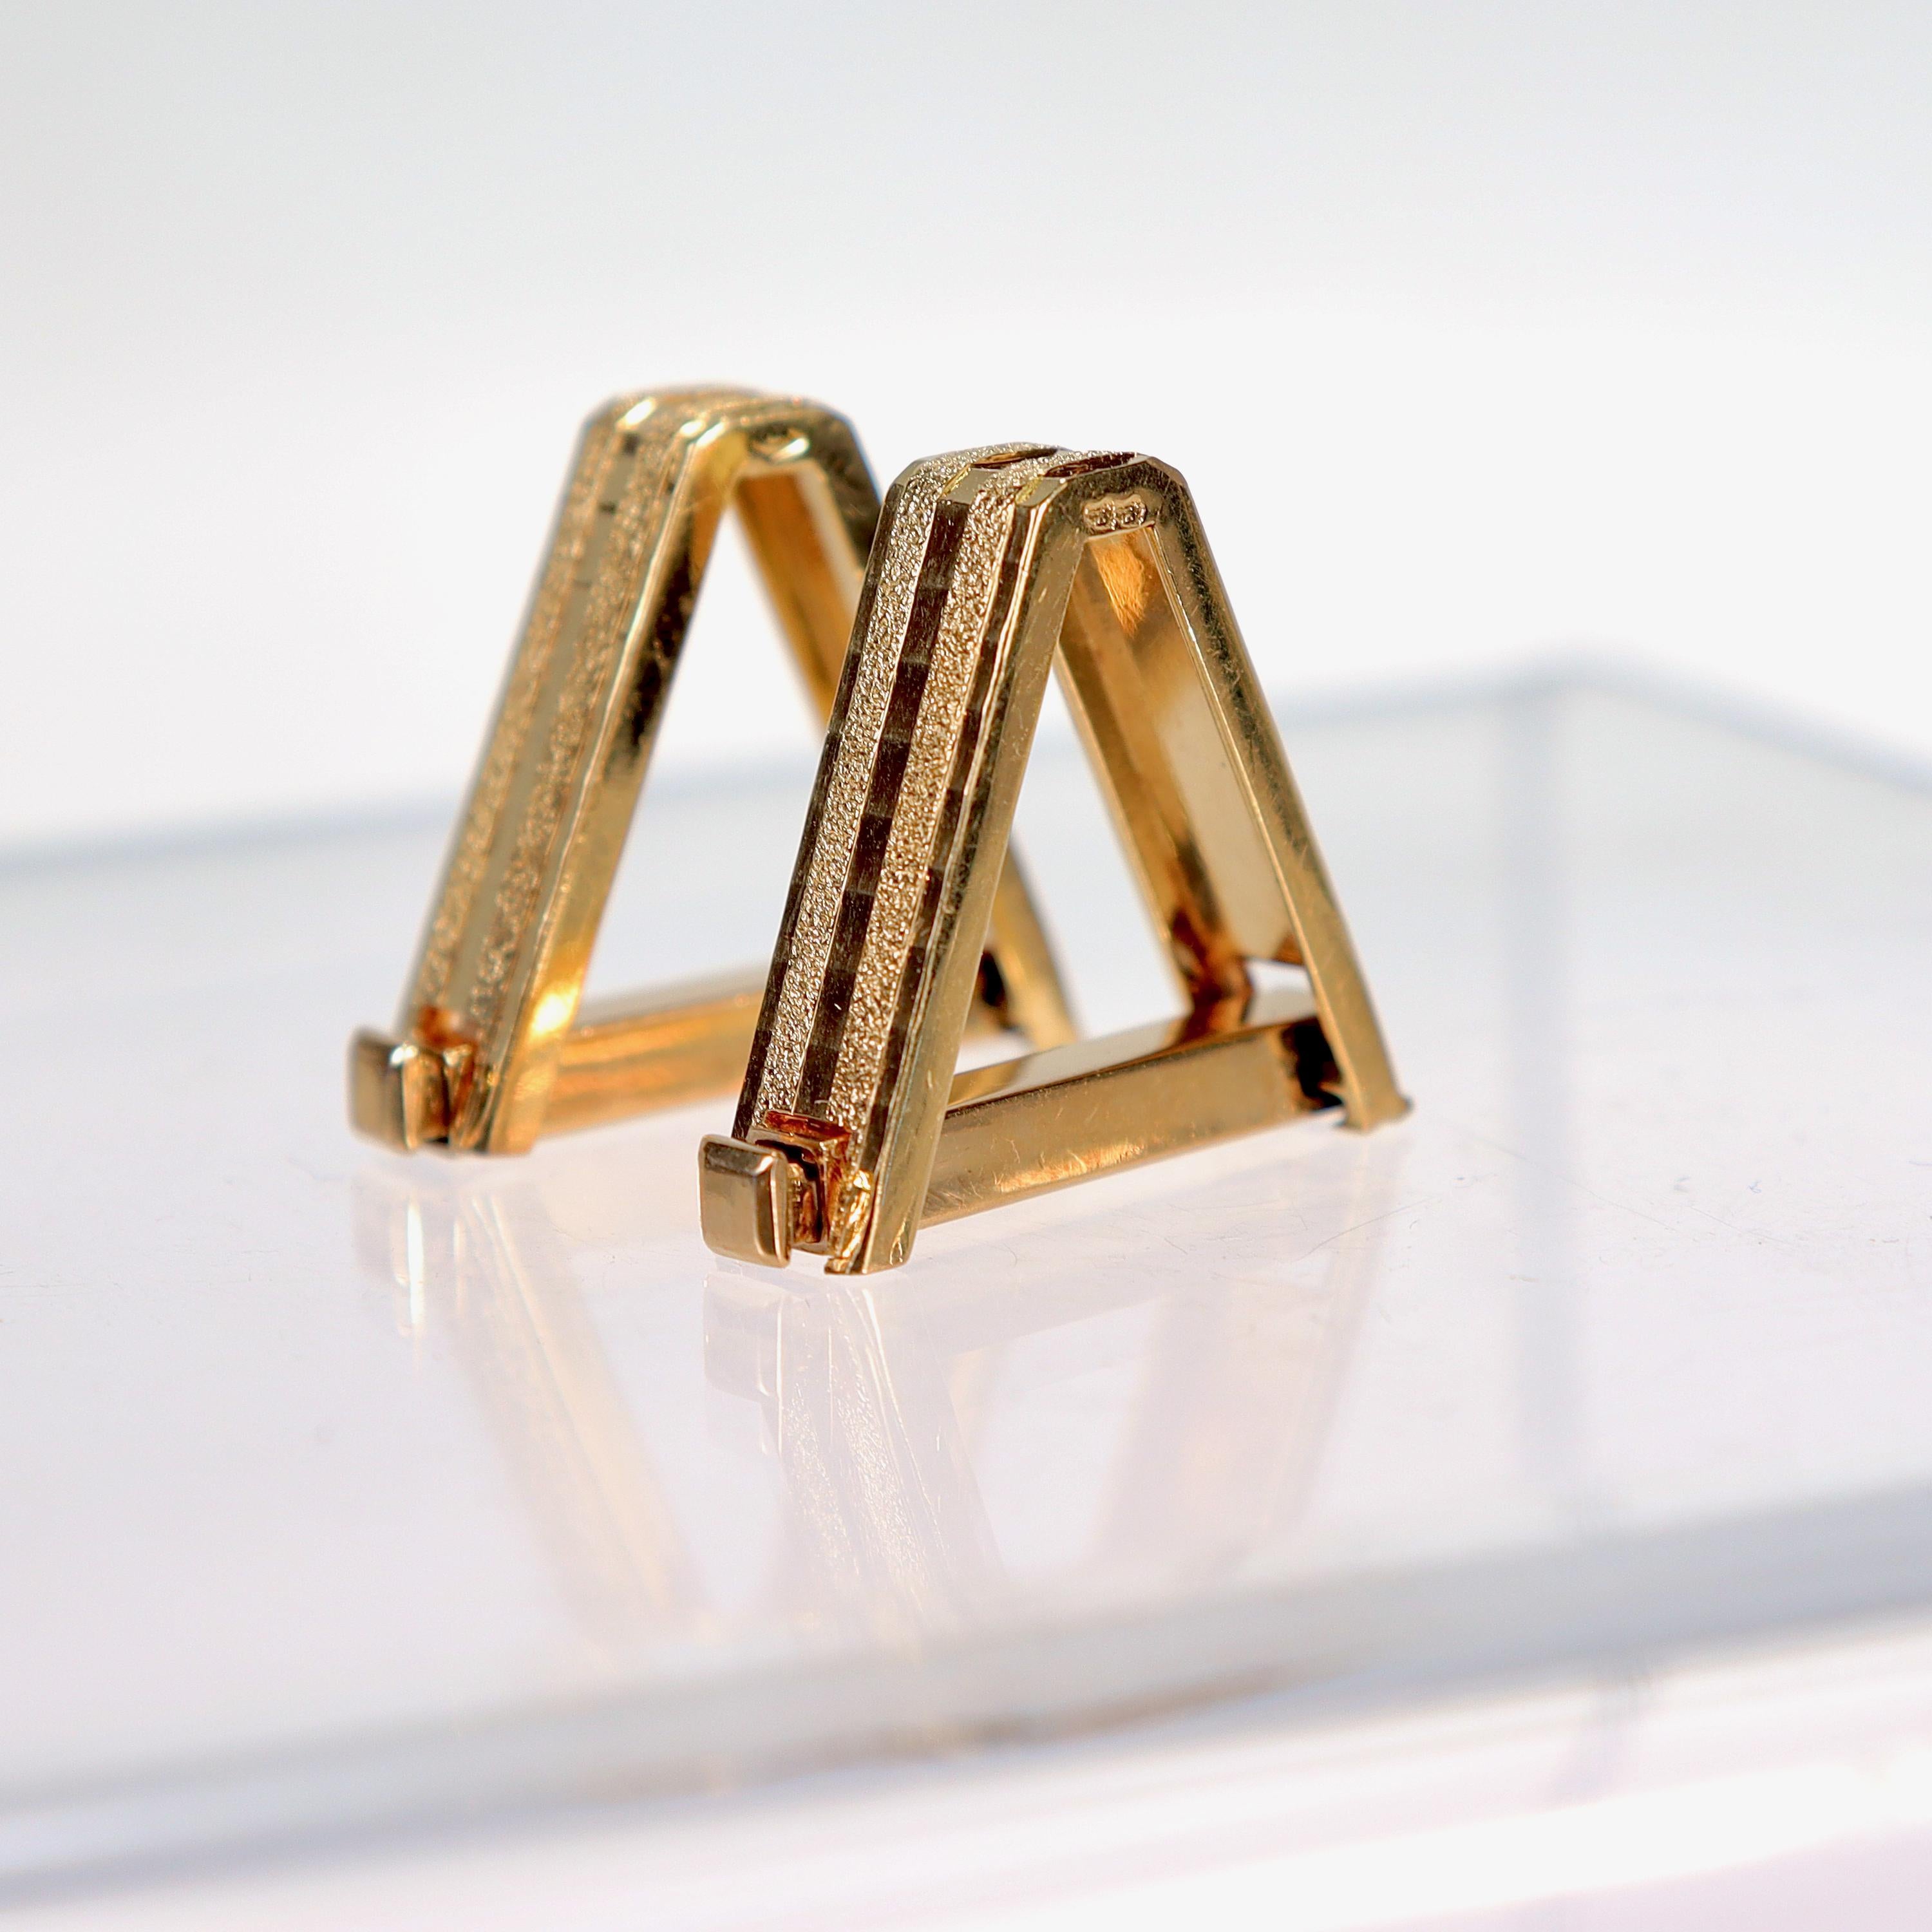 Signed 18 Karat French Gold Triangular or Wrapped Cufflinks For Sale 3